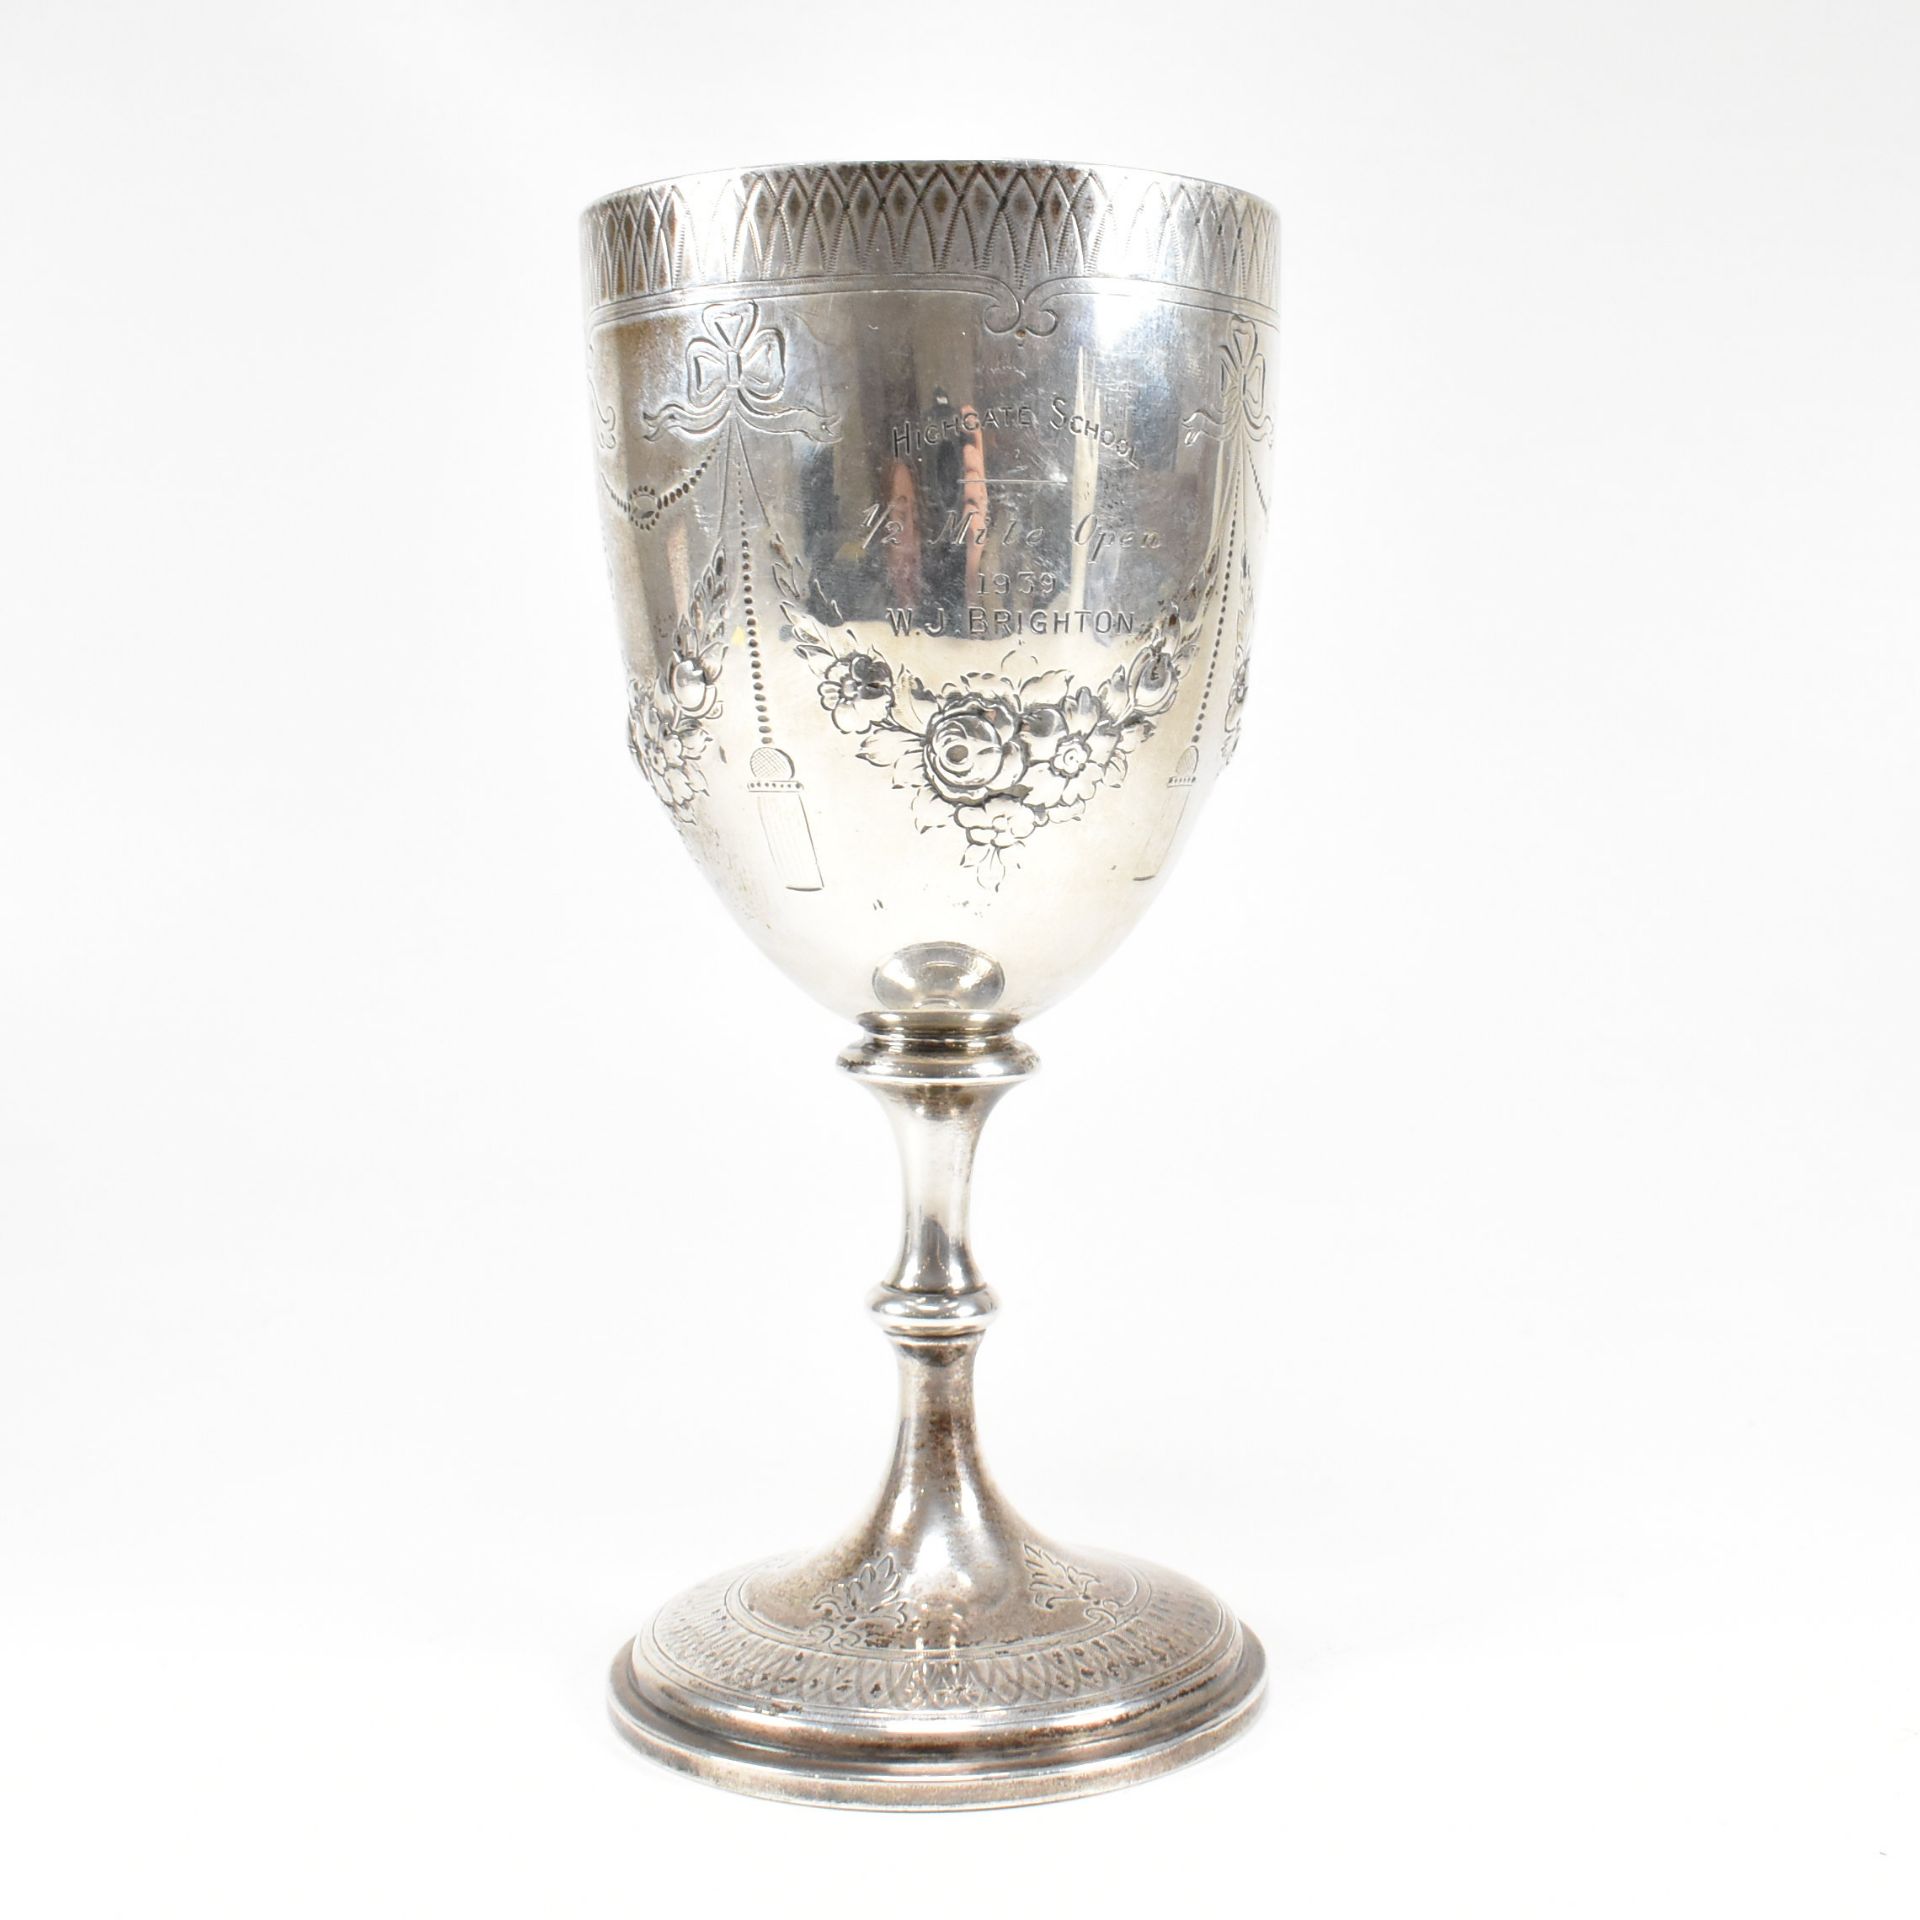 VICTORIAN HALLMARKED SILVER GOBLET TROPHY - Image 5 of 10